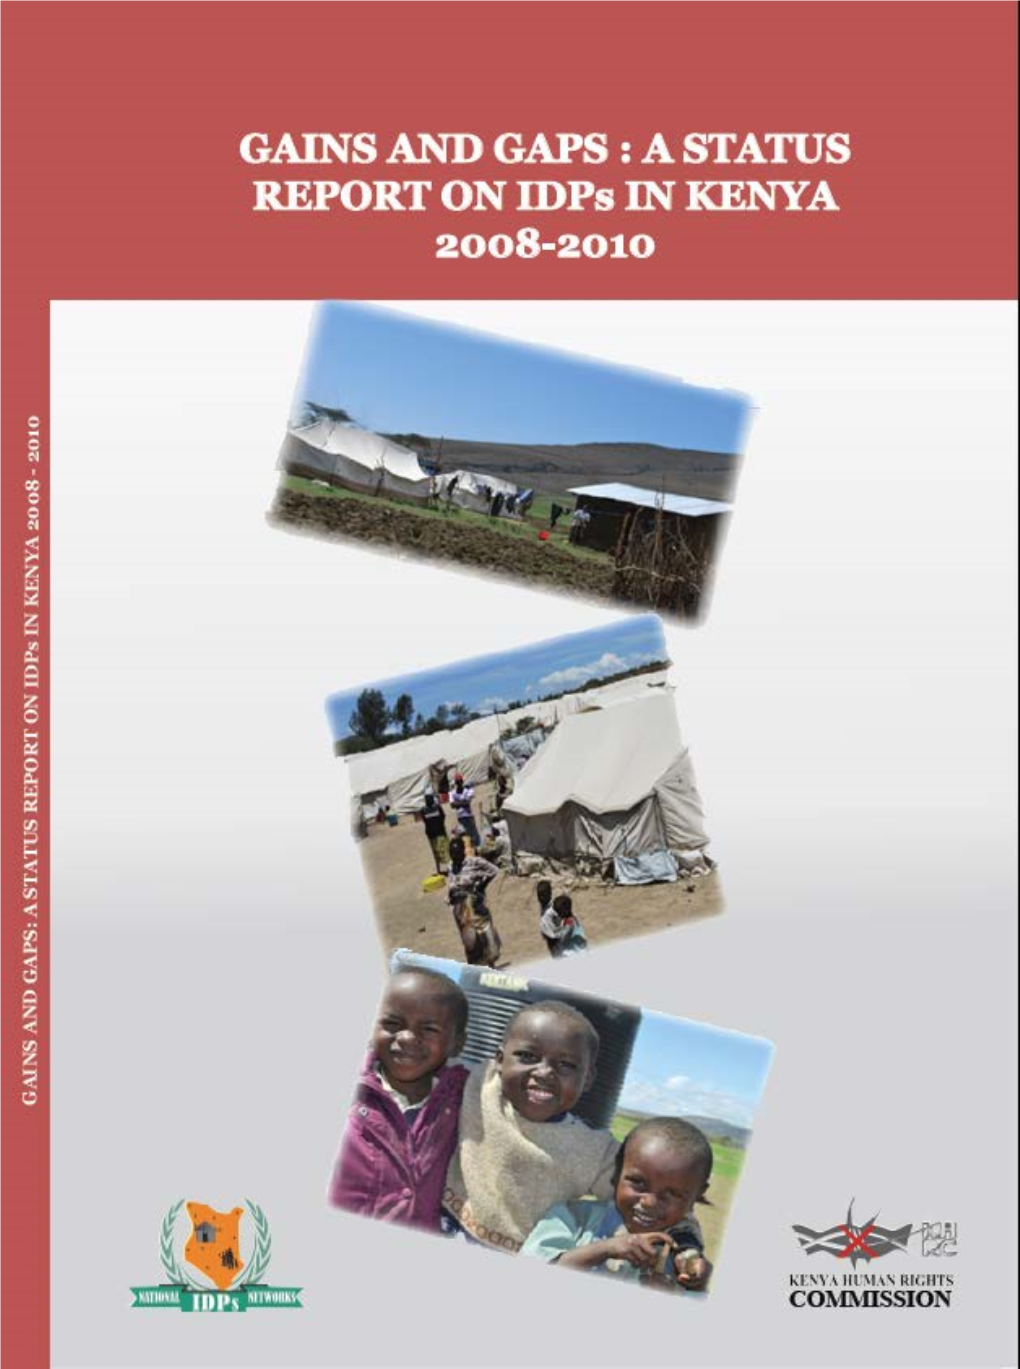 A STATUS REPORT on Idps in KENYA 2008-2010 by KHRC